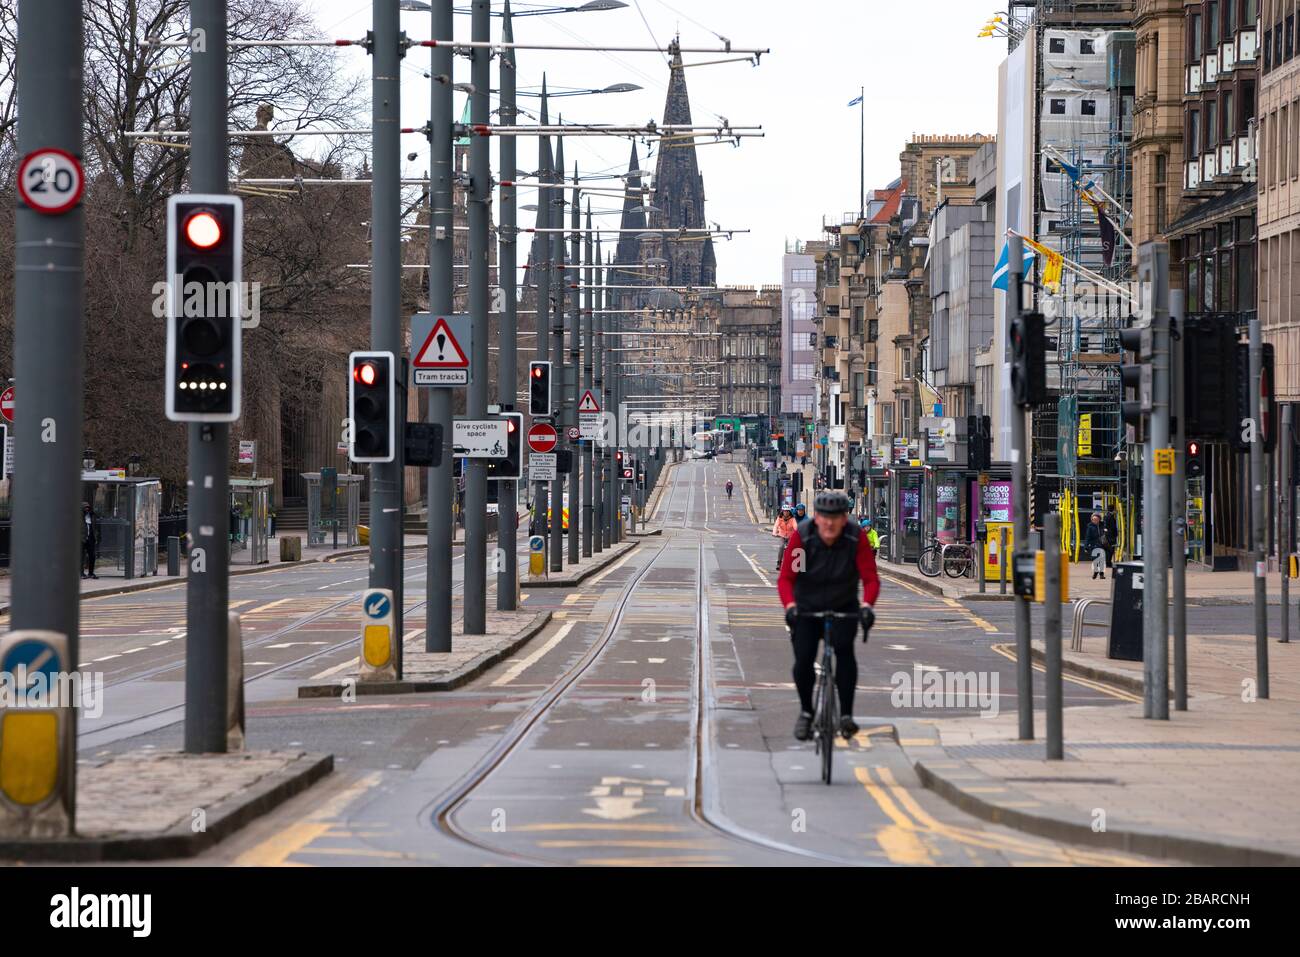 Edinburgh, Scotland, UK. 29 March, 2020. Life in Edinburgh on the first Sunday of the Coronavirus lockdown. Streets deserted, shops and restaurants closed, very little traffic on streets and reduced public transport. Pictured; Princes Street mostly empty. Iain Masterton/Alamy Live News Stock Photo